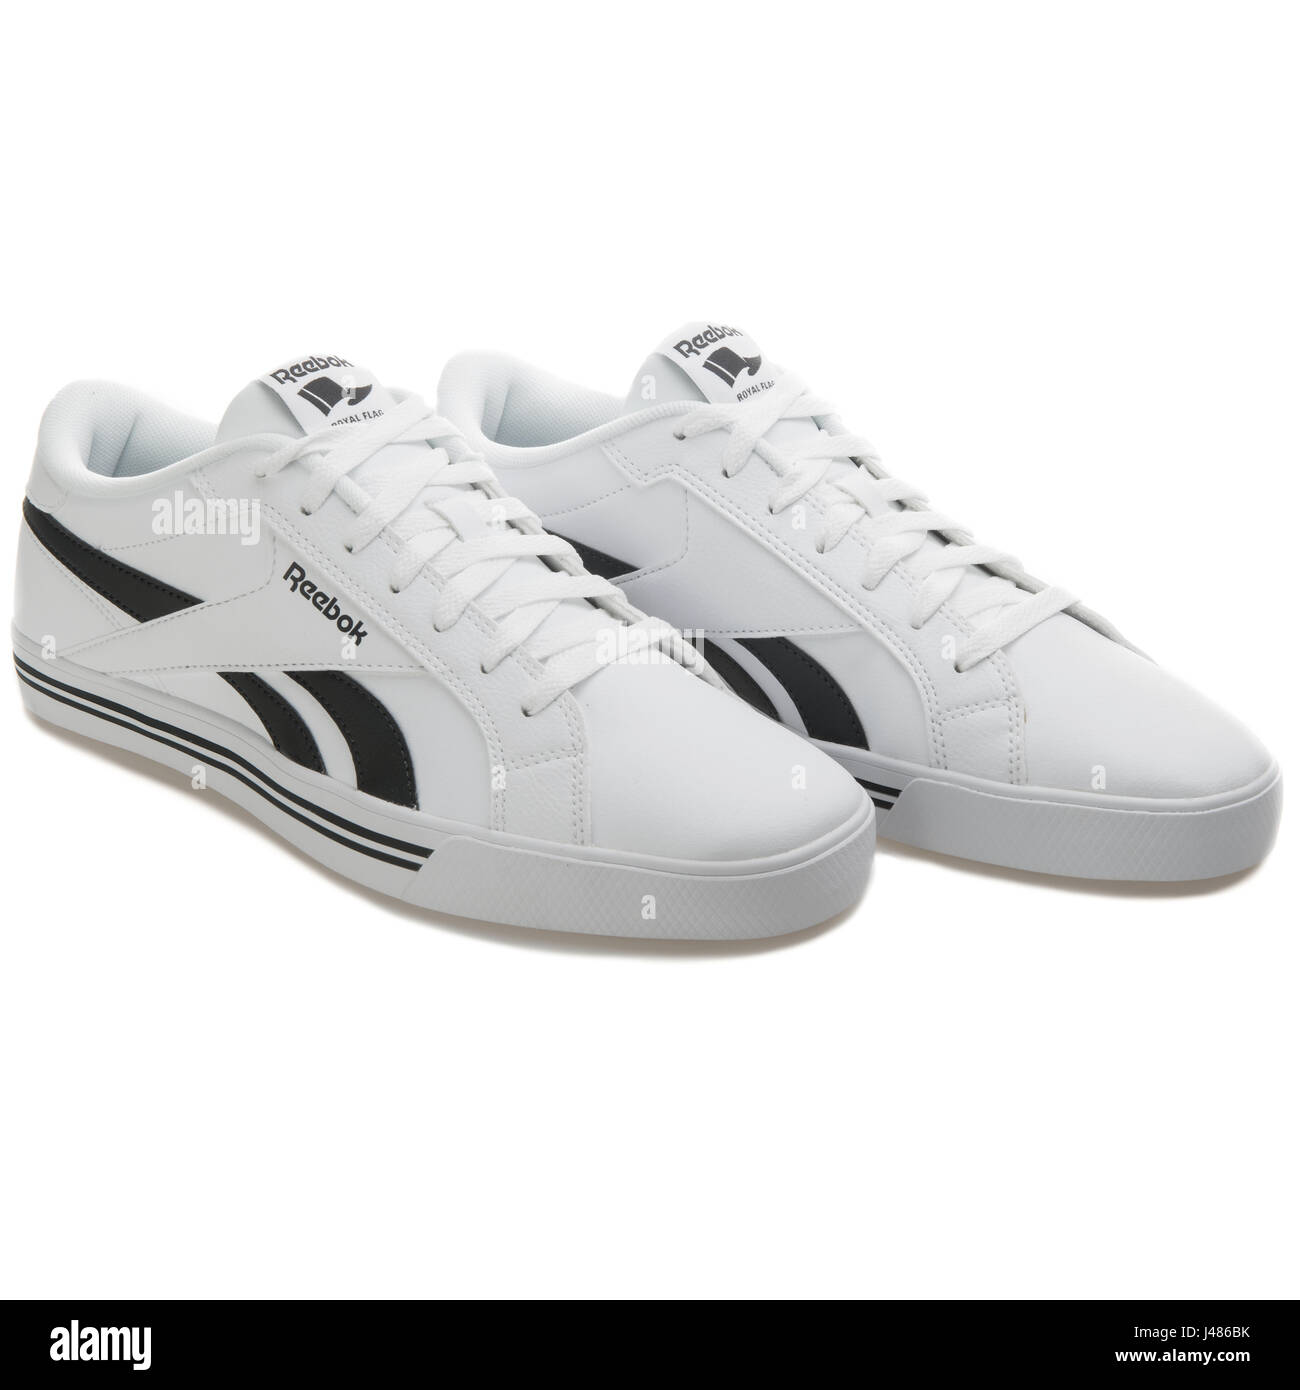 Reebok Shoes Men Sports High Resolution Stock Photography and Images - Alamy